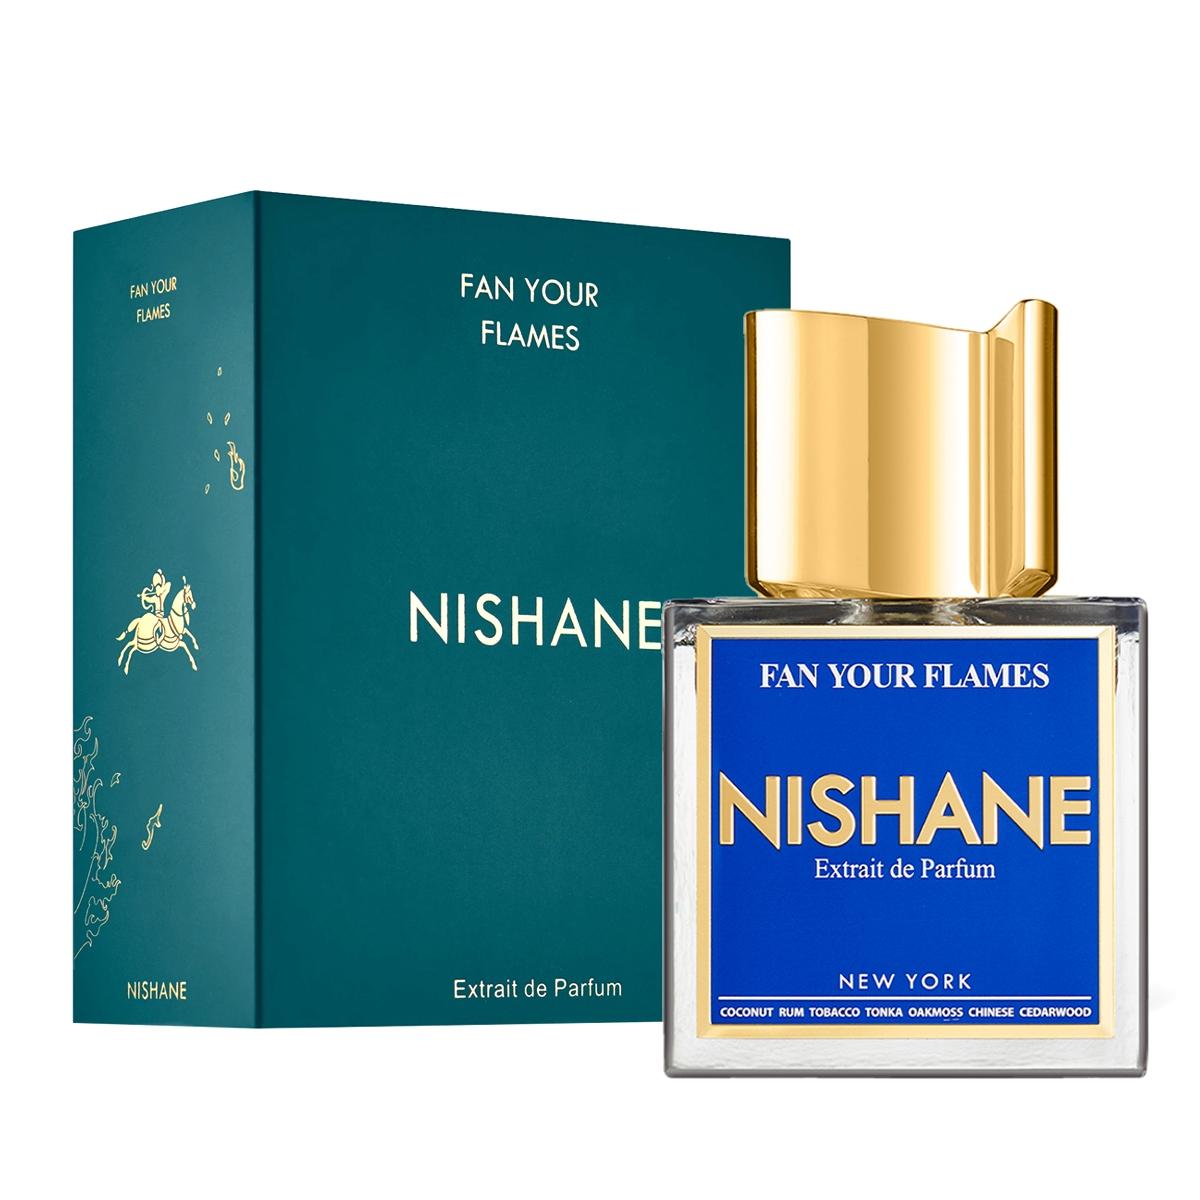 Selected image for NISHANE Unisex exdp Fan Your Flames, 100ml